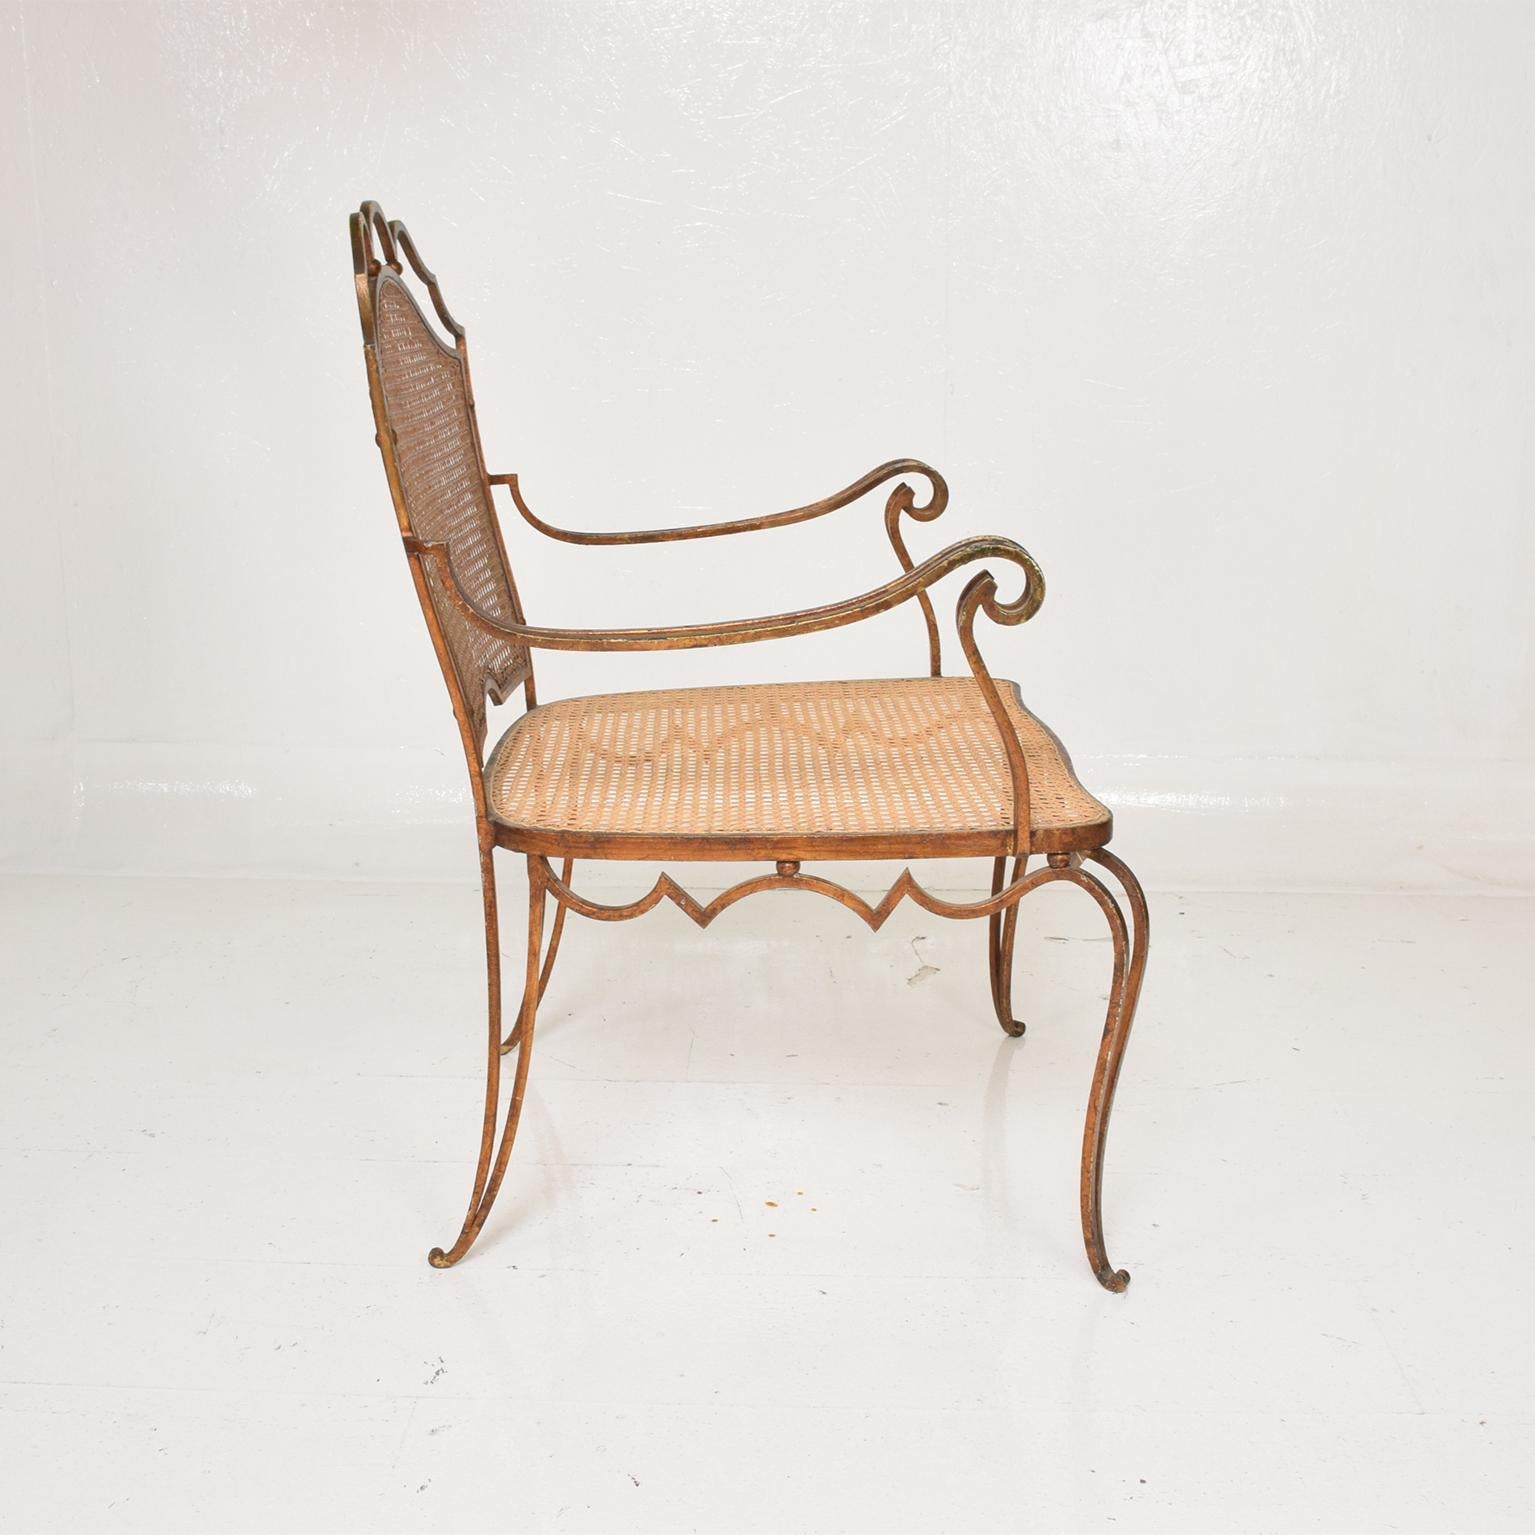 Elegant Regency armchair by Arturo Pani (famed Mexican Modernist) Mexico City, circa 1948 early 1950s Mexican Modernism at its finest.
Chair designed in forged iron with gold leaf finish handwoven cane wicker seat and backrest
Chairs present